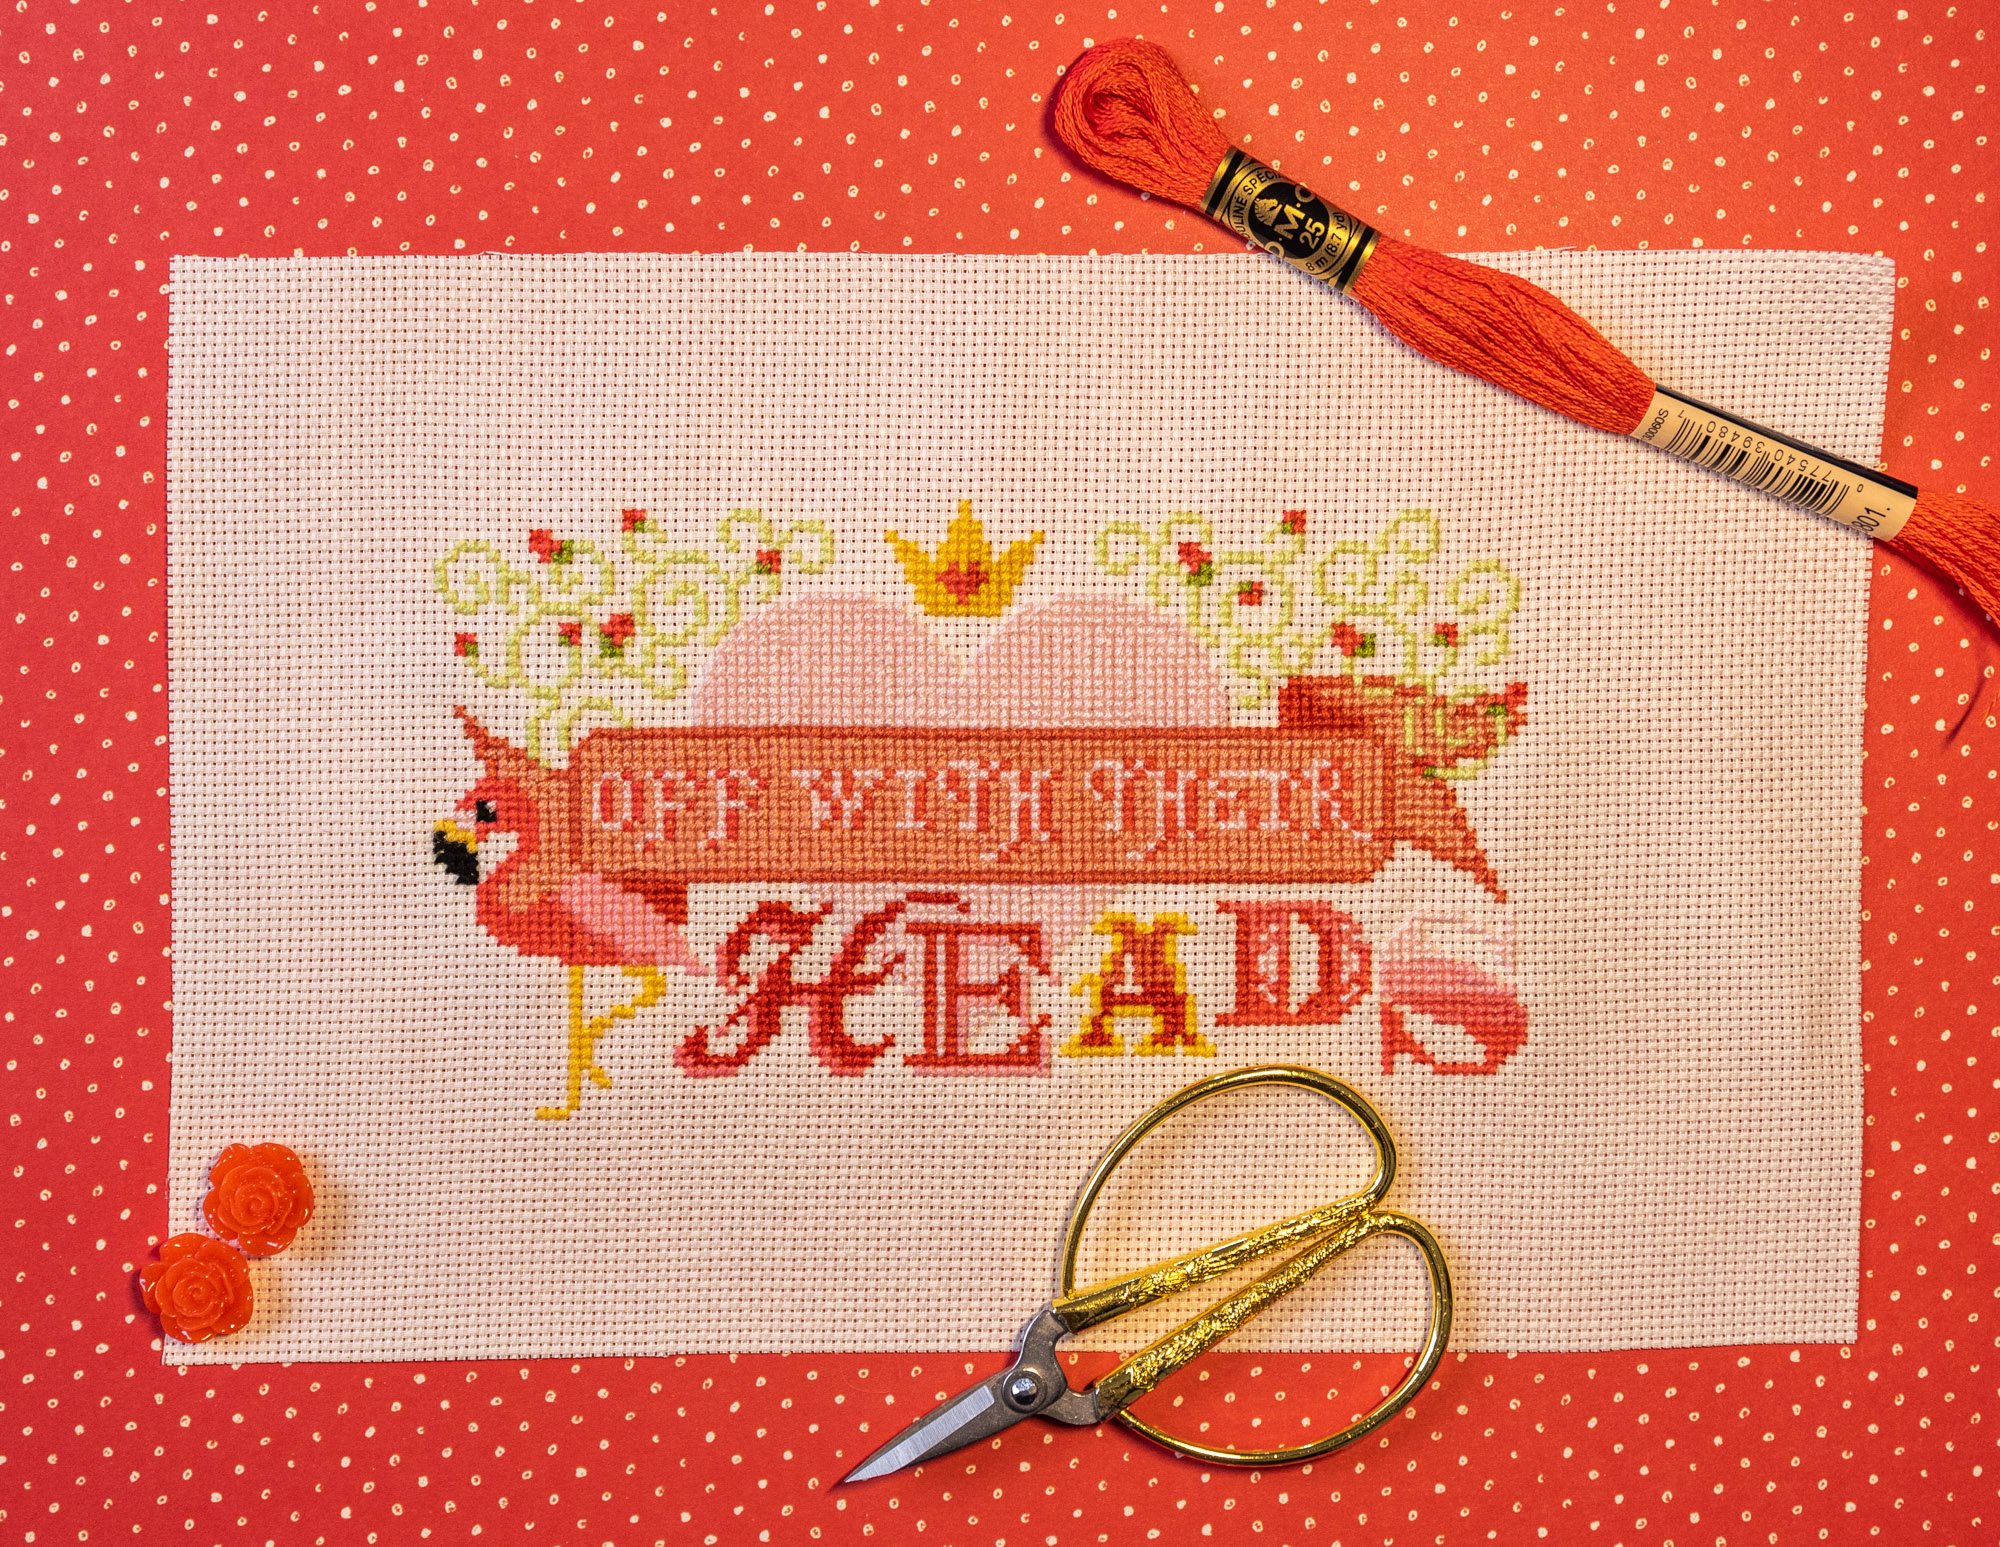 Off with their Heads - Queen of Hearts Cross Stitch Pattern